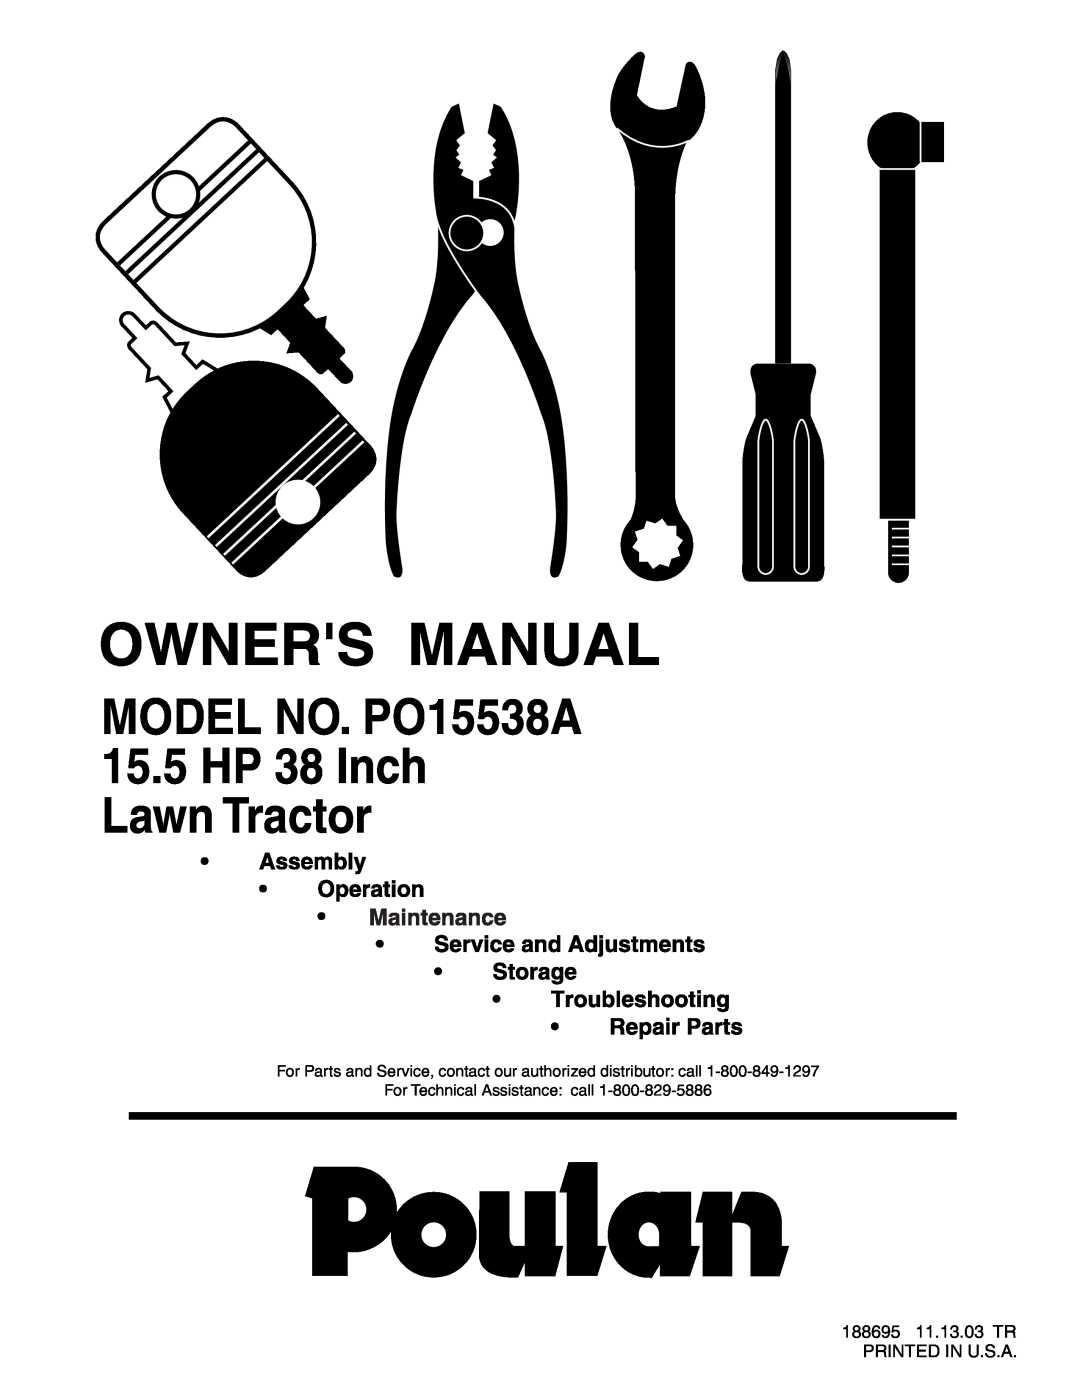 Poulan manual MODEL NO. PO15538A 15.5 HP 38 Inch Lawn Tractor, 188695 11.13.03 TR PRINTED IN U.S.A 